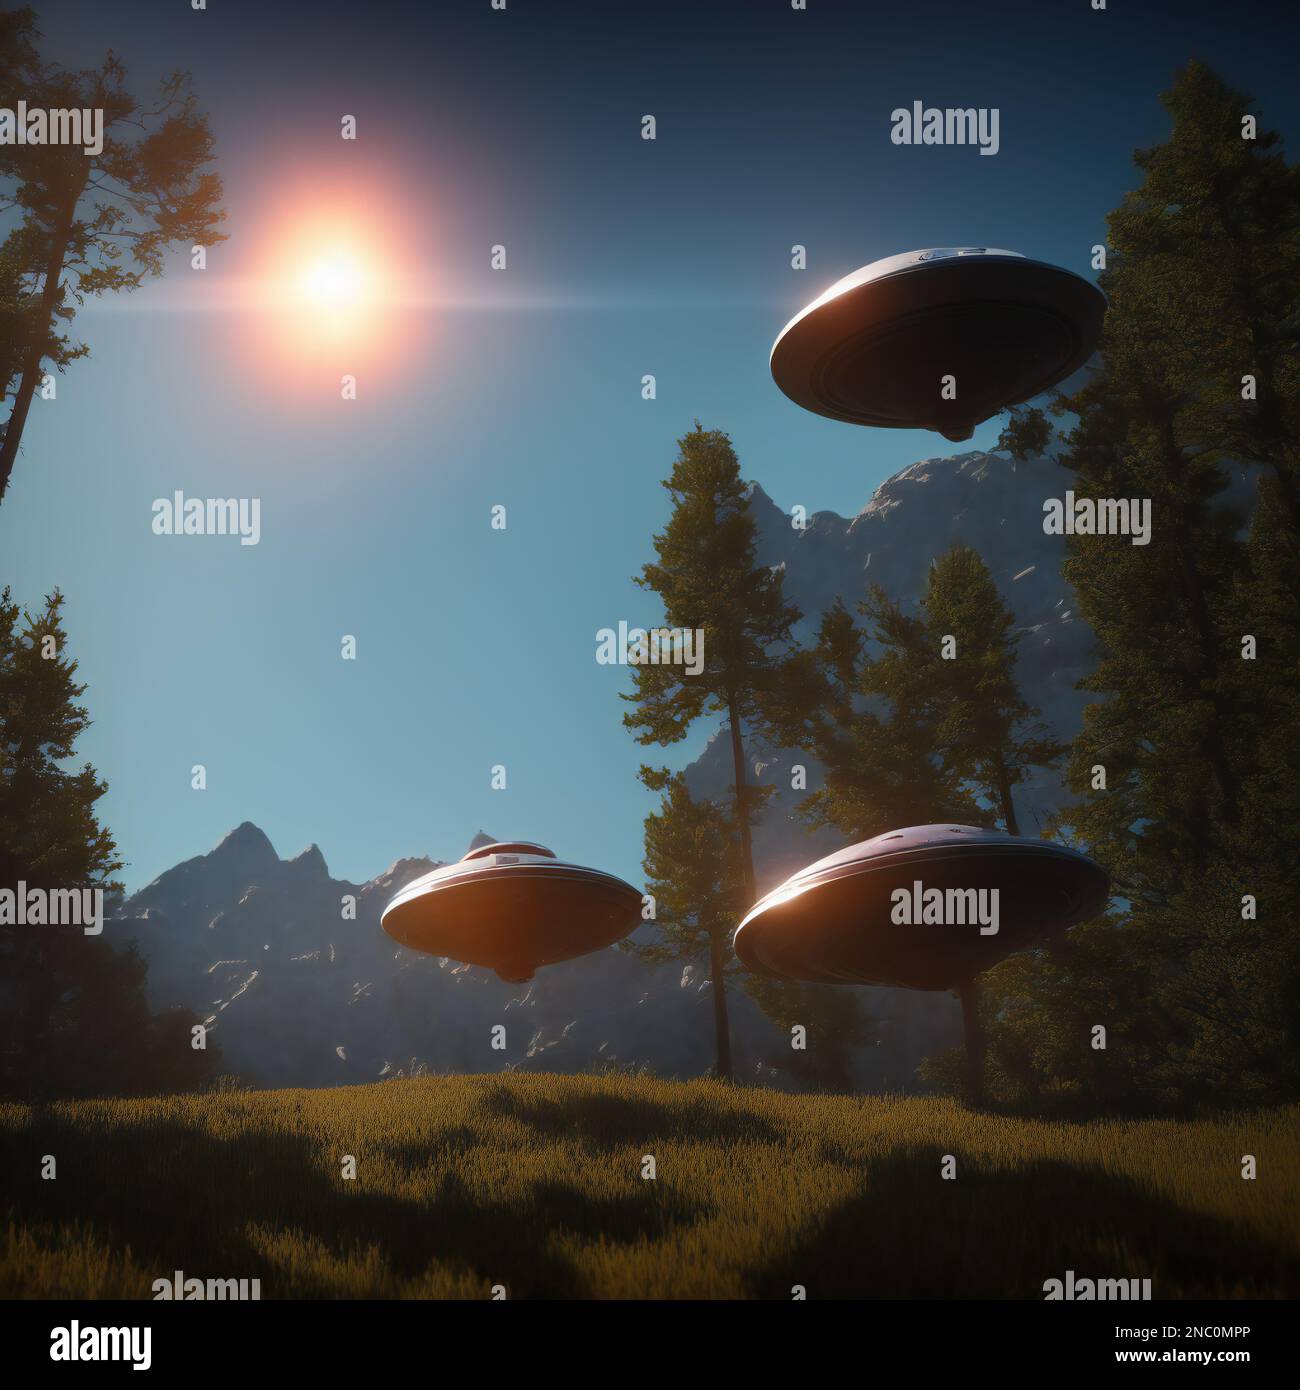 Three Flying Saucers Visiting An Earth-Like Planet, Illustration Stock Photo